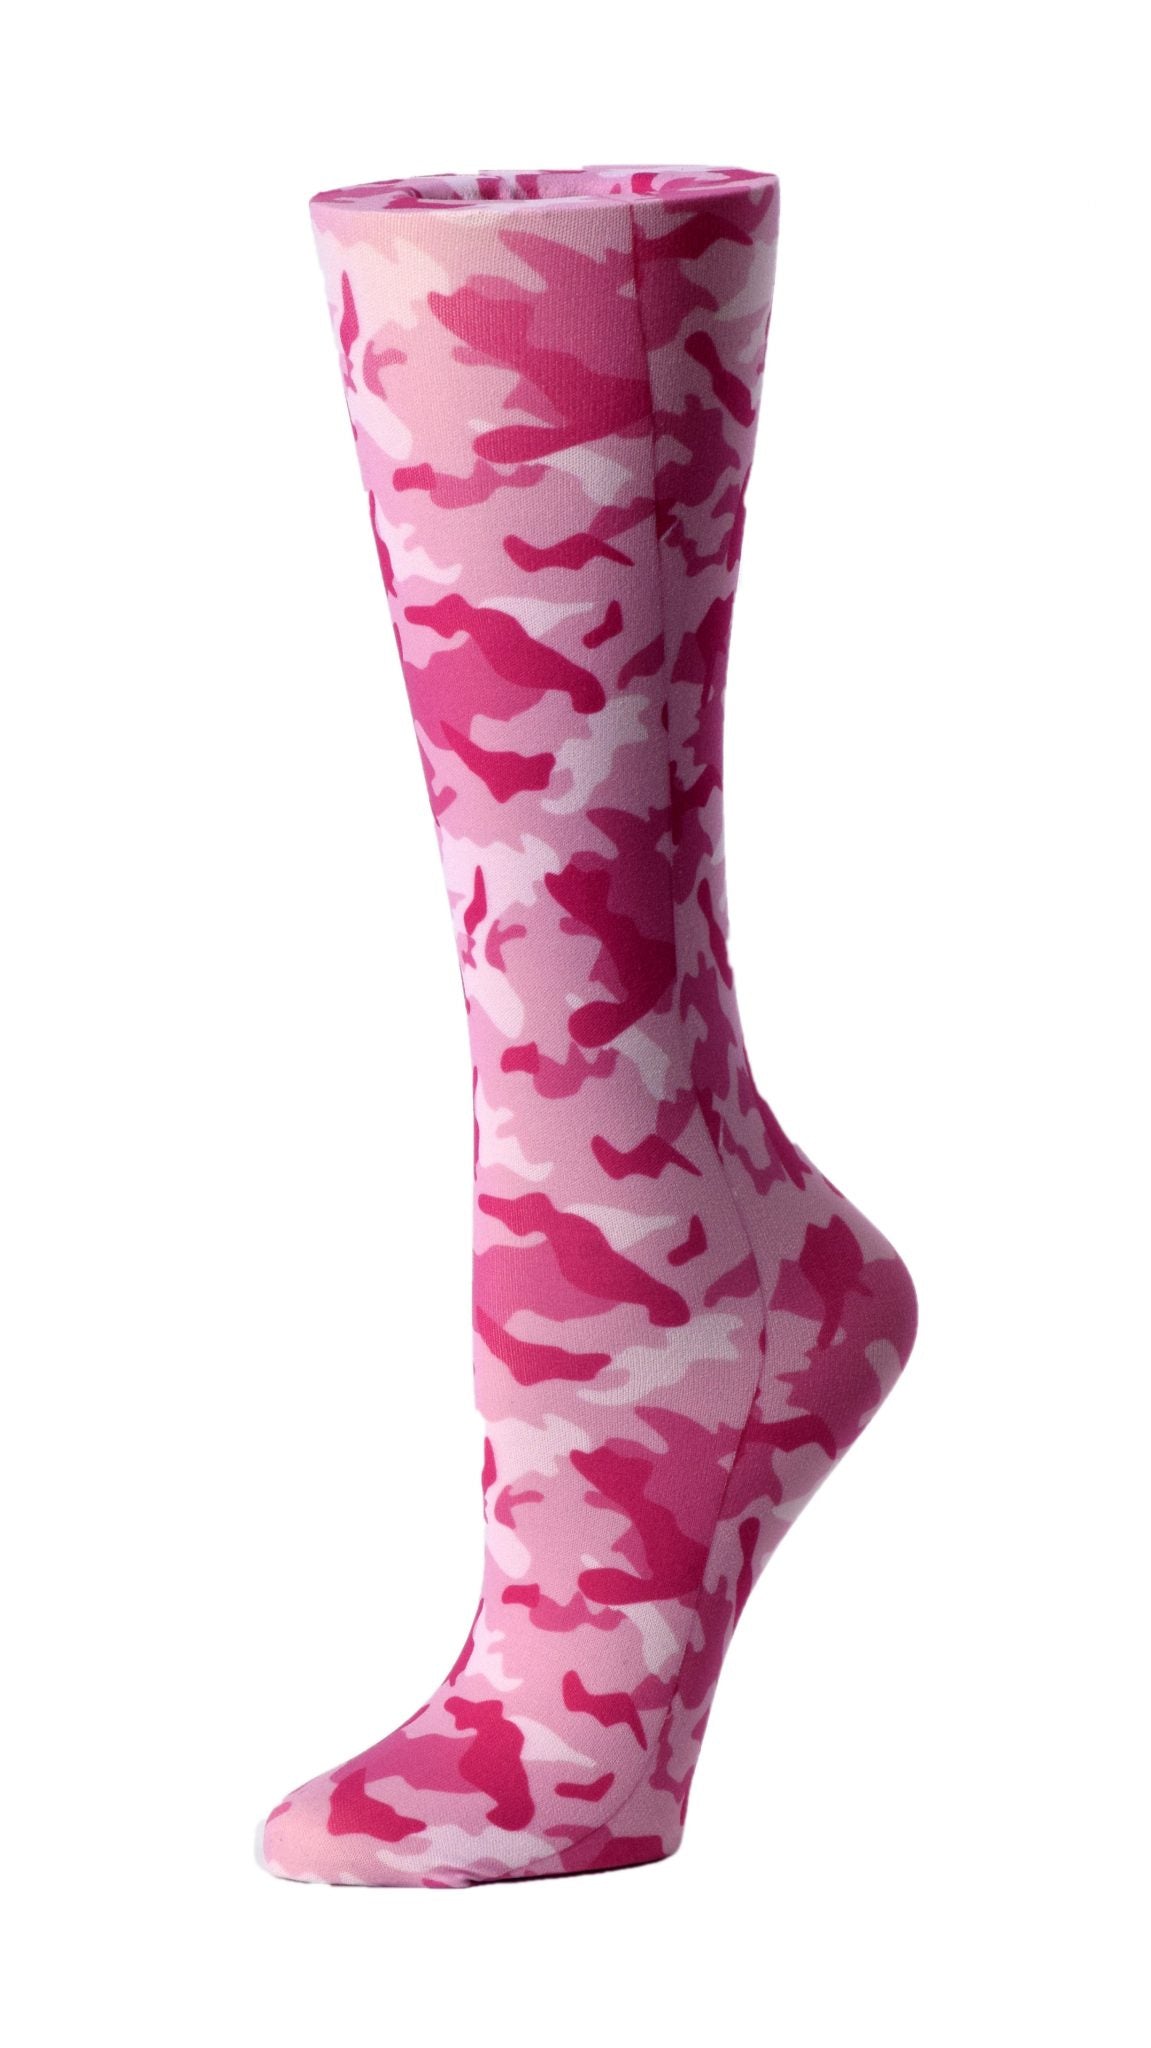 Cutieful Moderate Compression Socks 10-18 mmHg Knit in Print Patterns Pink Camo at Parker's Clothing and Shoes.